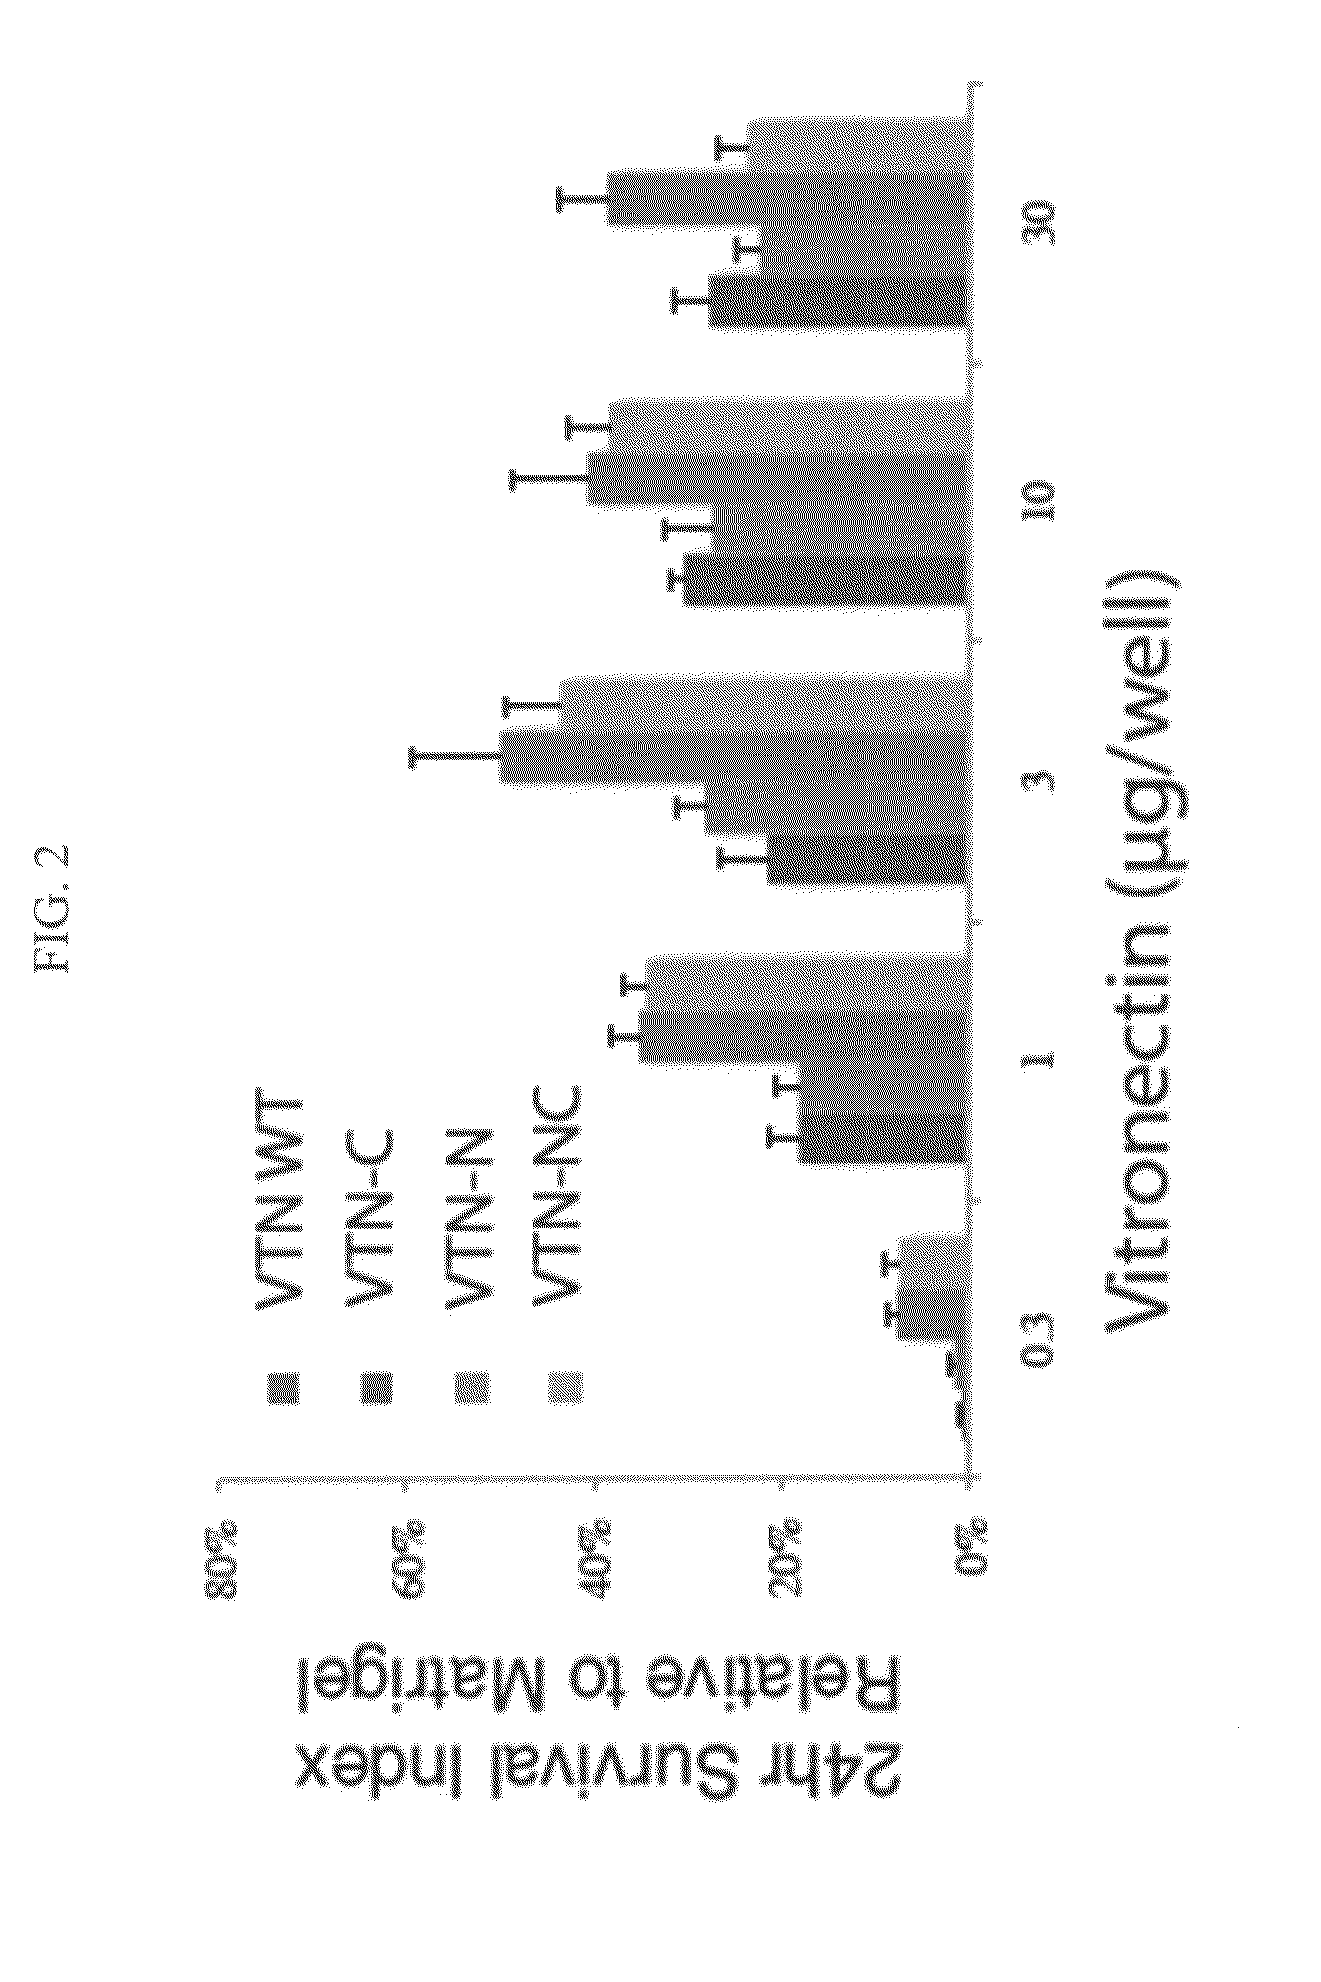 Vitronectin-derived cell culture substrate and uses thereof